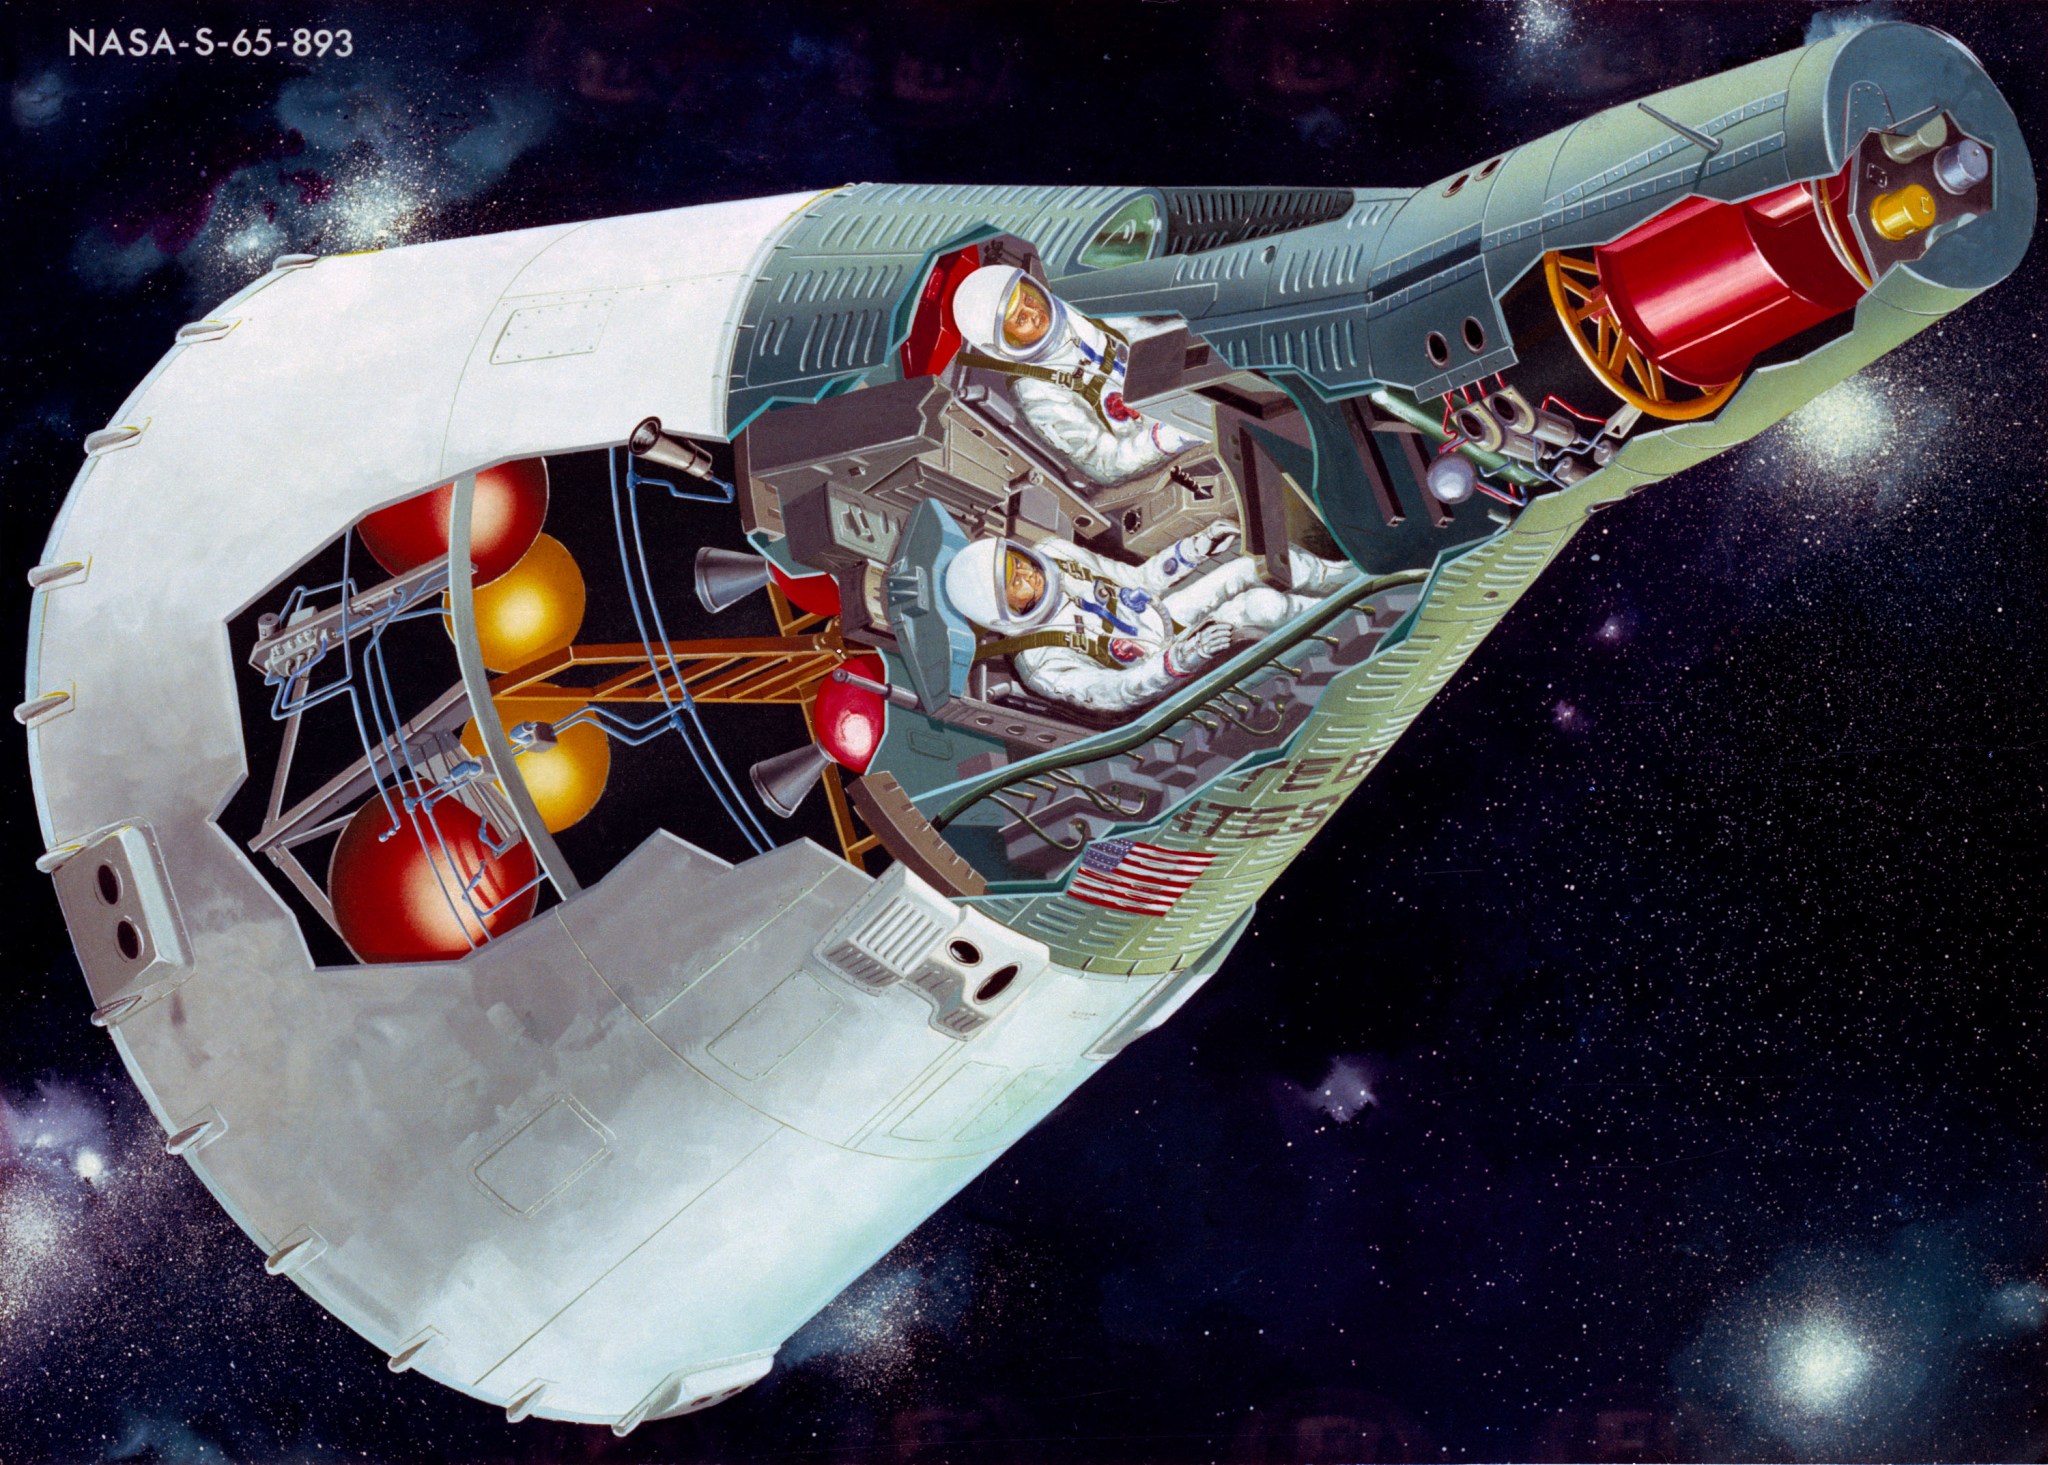 An illustration of a Gemini spacecraft in flight, showing a cutaway view